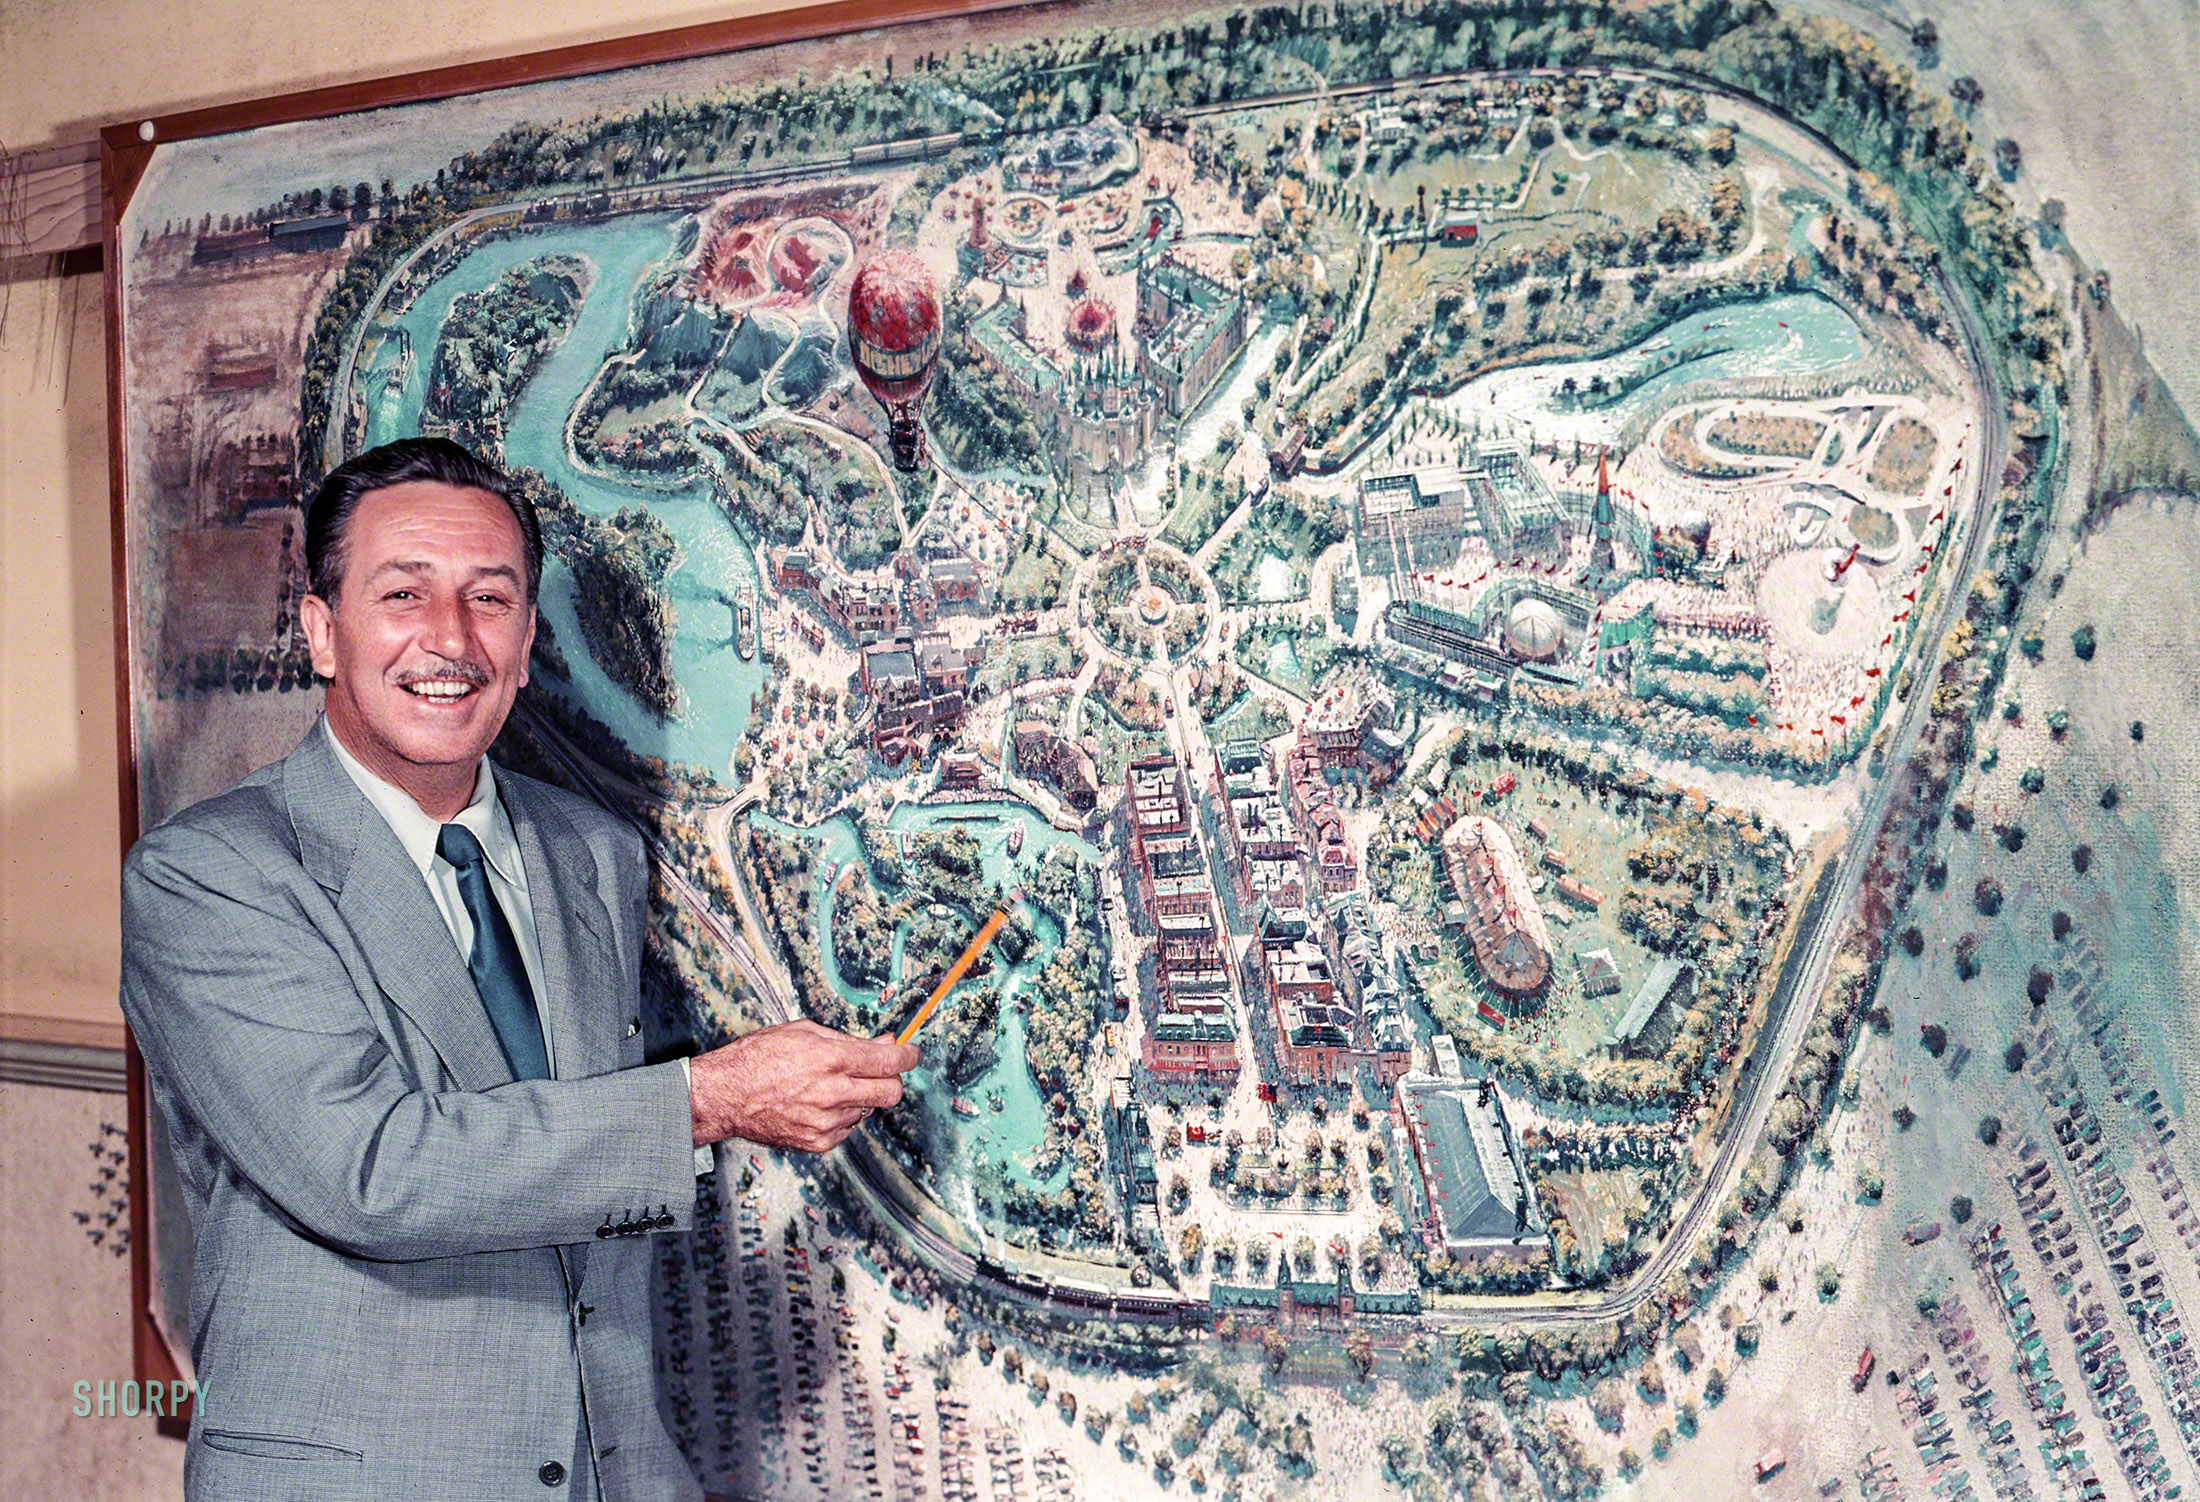 July 1954. Los Angeles. "Walt Disney pointing to a plan for Disneyland, under construction in Anaheim." Color transparency from photos for the Look magazine assignment "Here's your first view of Disneyland." View full size.